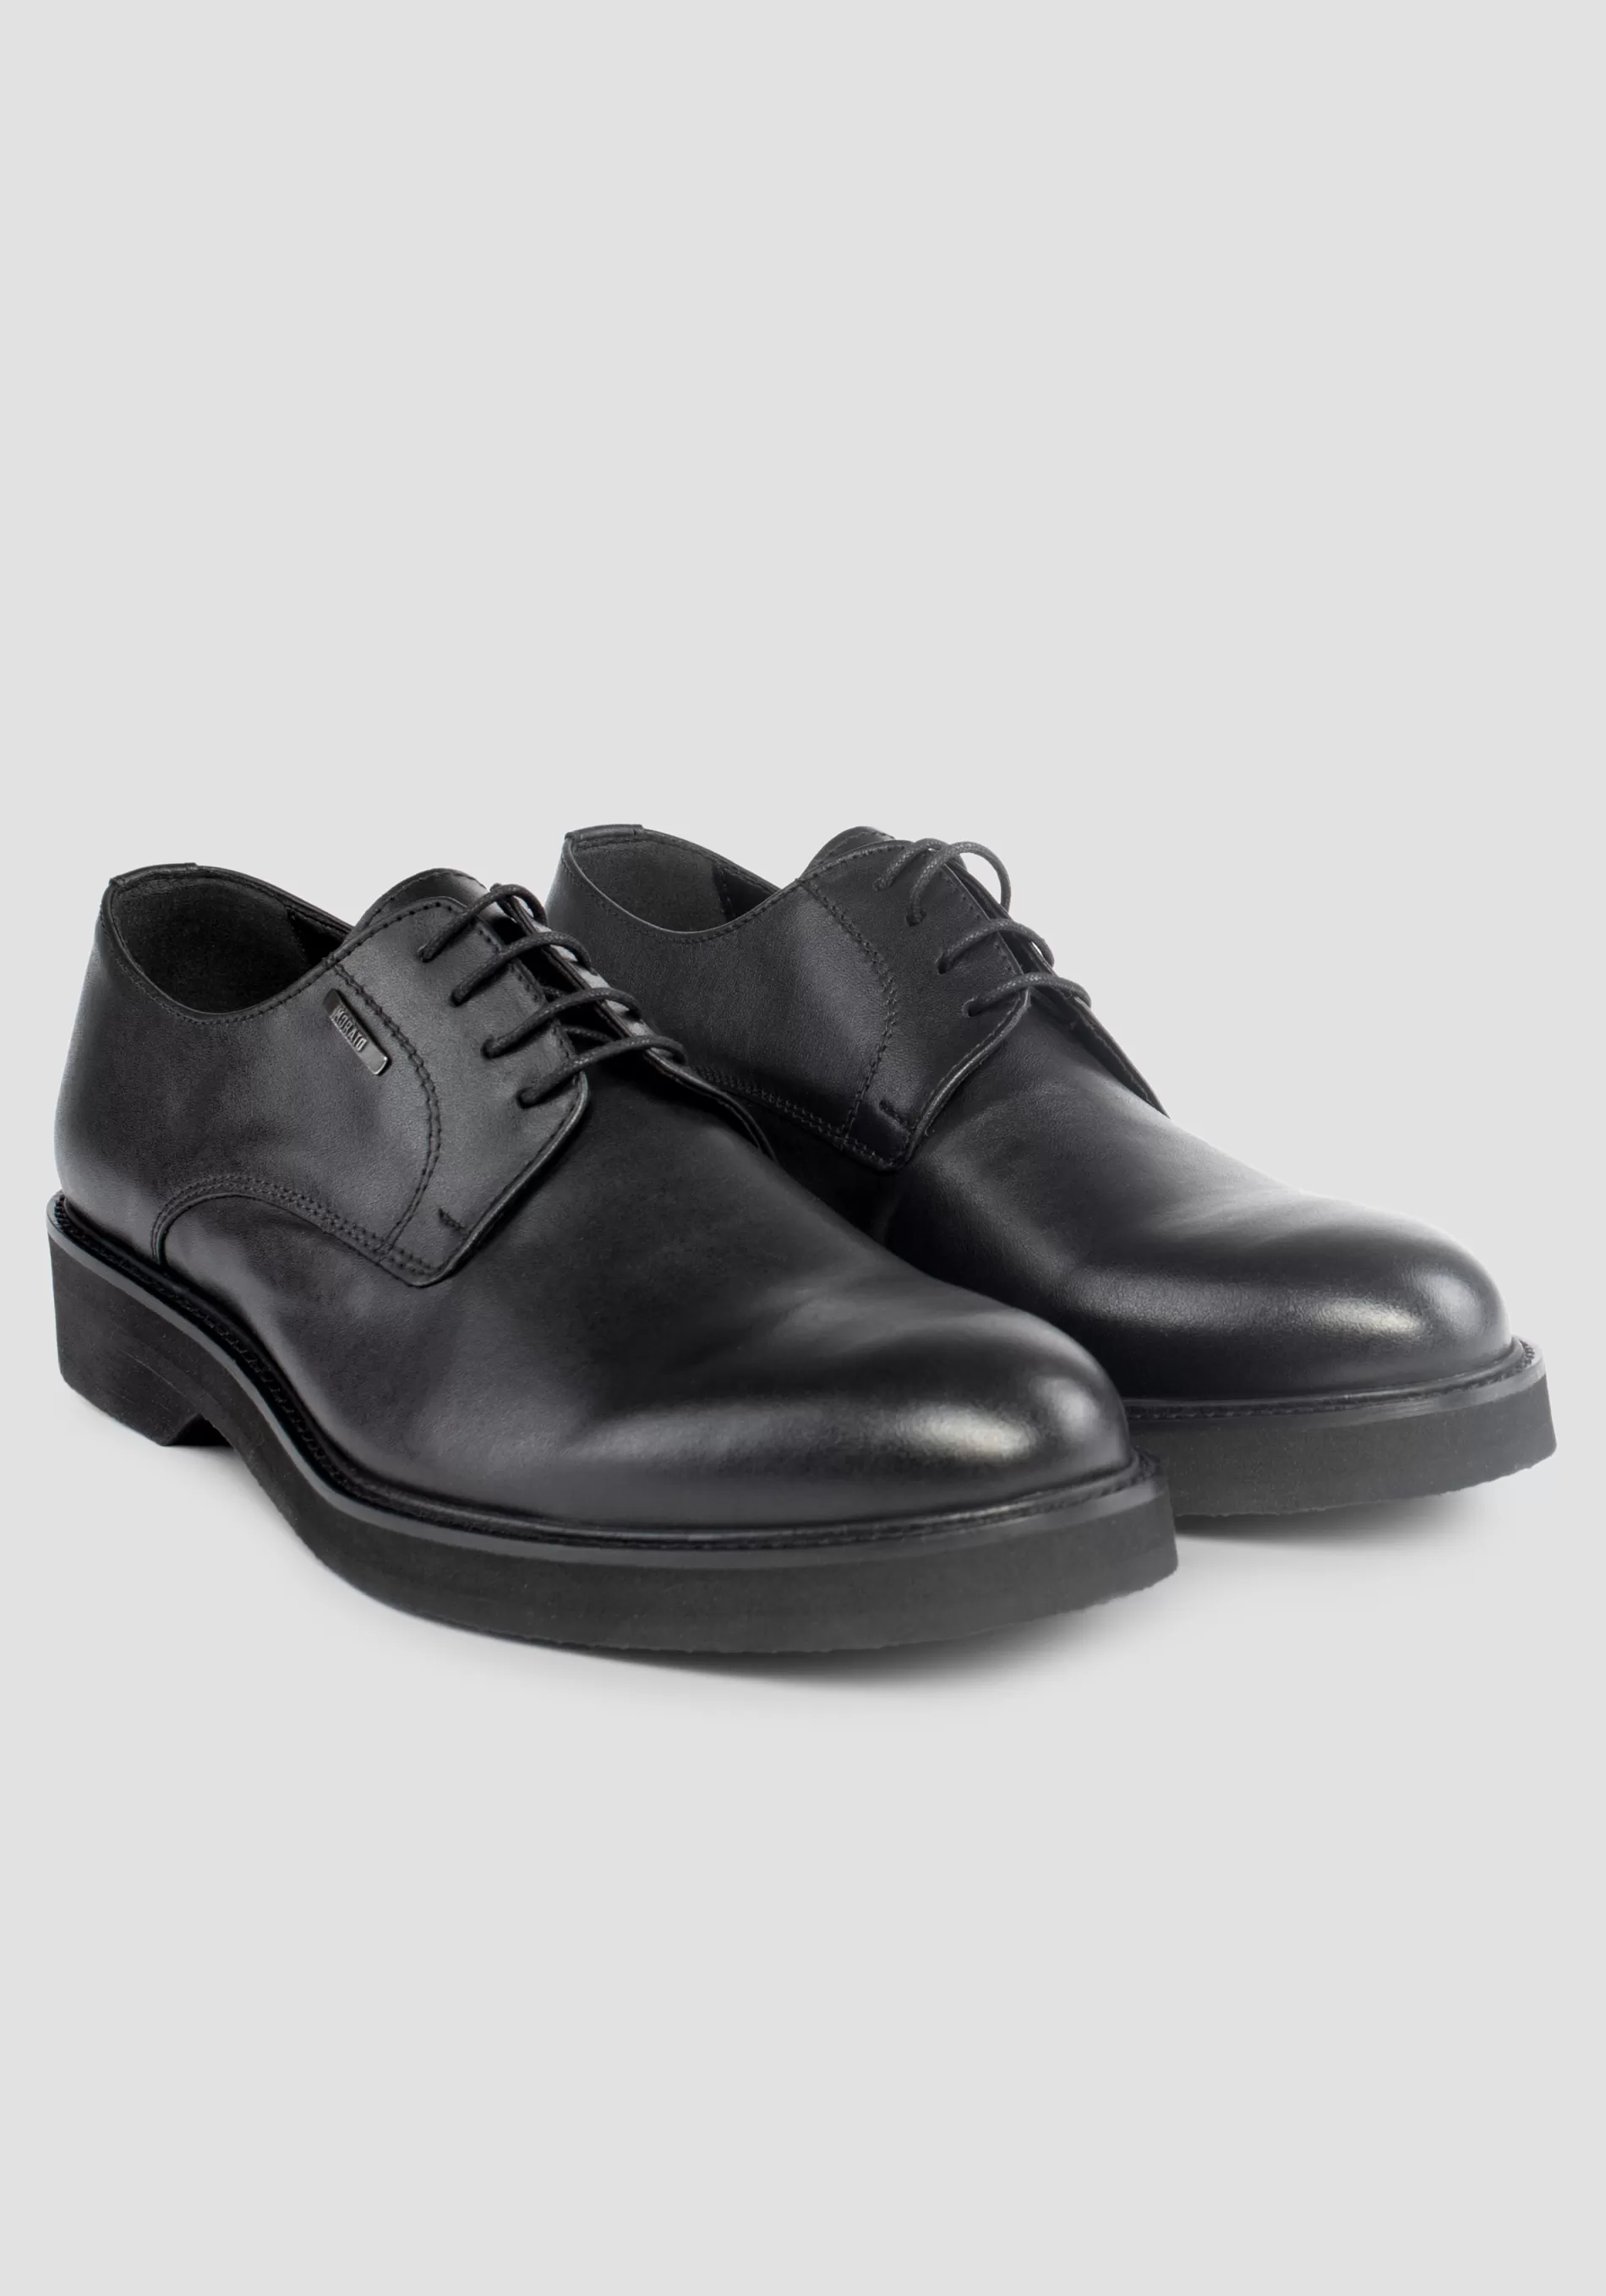 Discount "SEAN" LEATHER DERBY Formal shoes